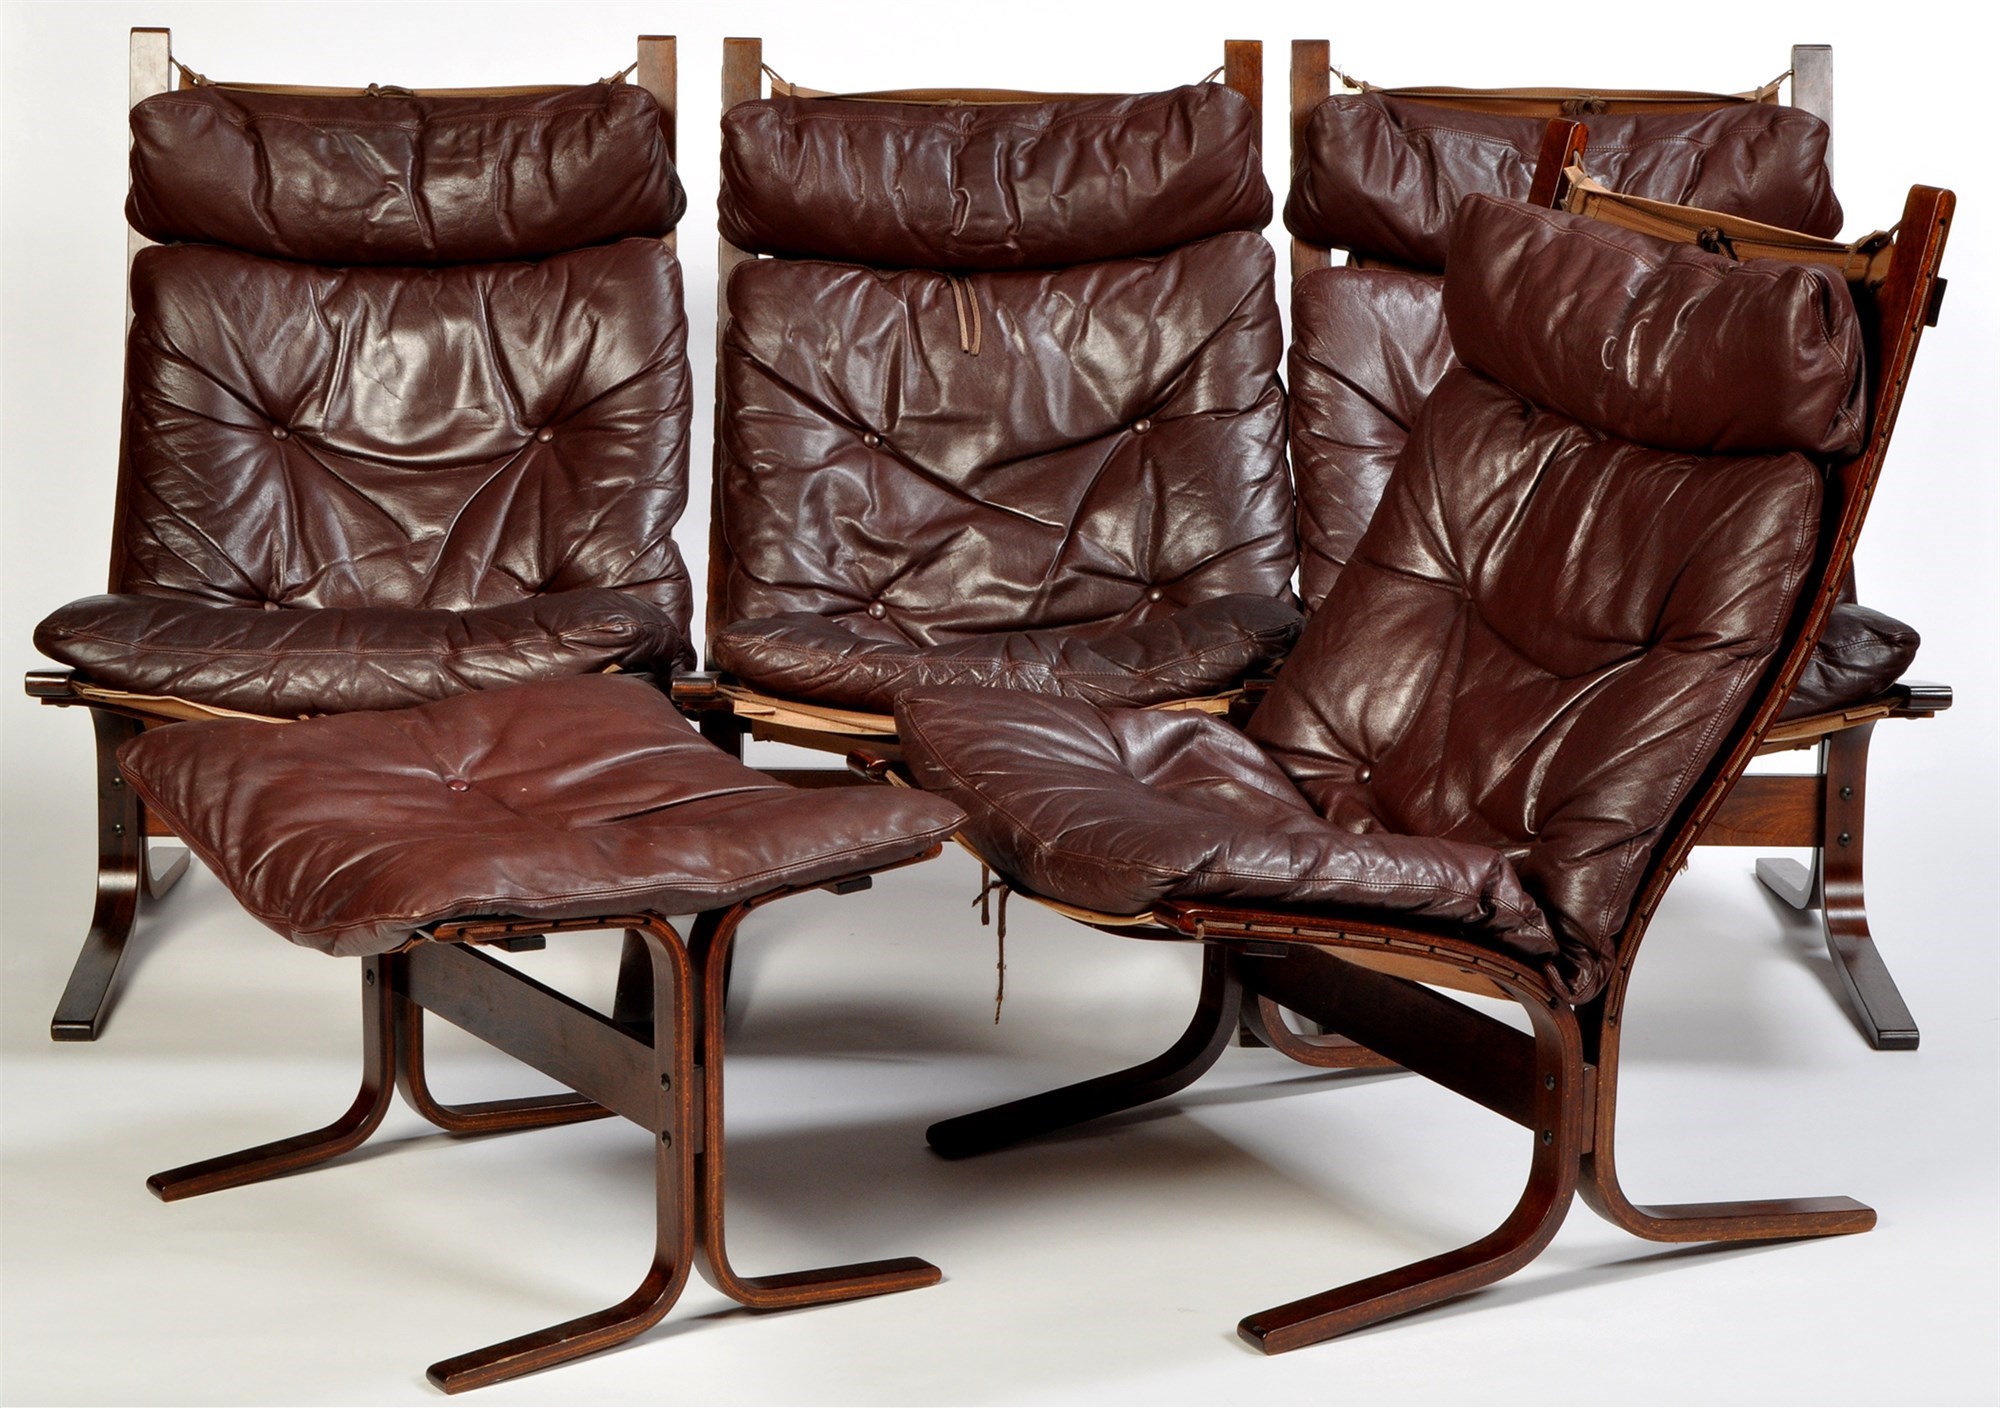 Westnofa designed by Ingmar Relling: four 'Siesta' chairs and a footstool,